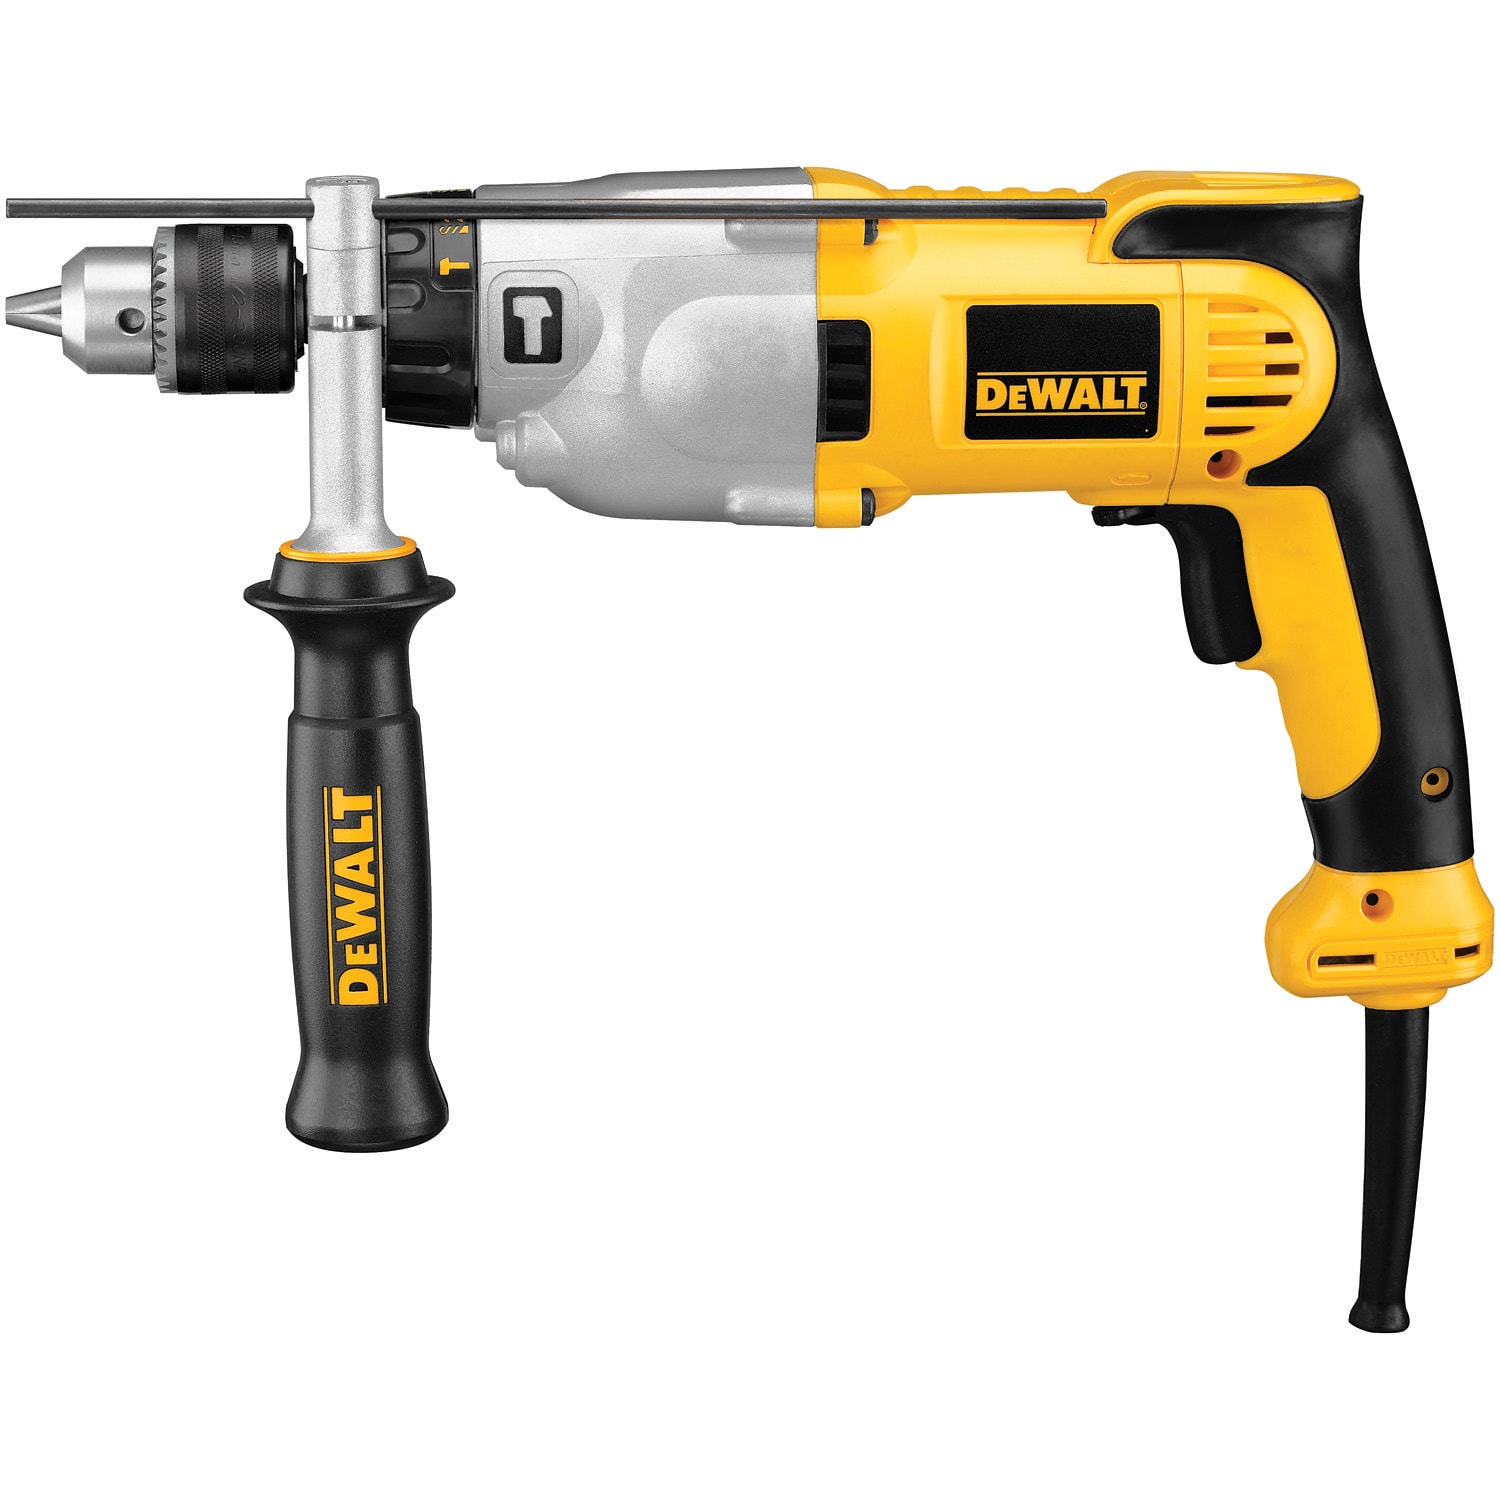 DEWALT 1/2-in Variable Speed Corded Drill in the Hammer Drills department at Lowes.com